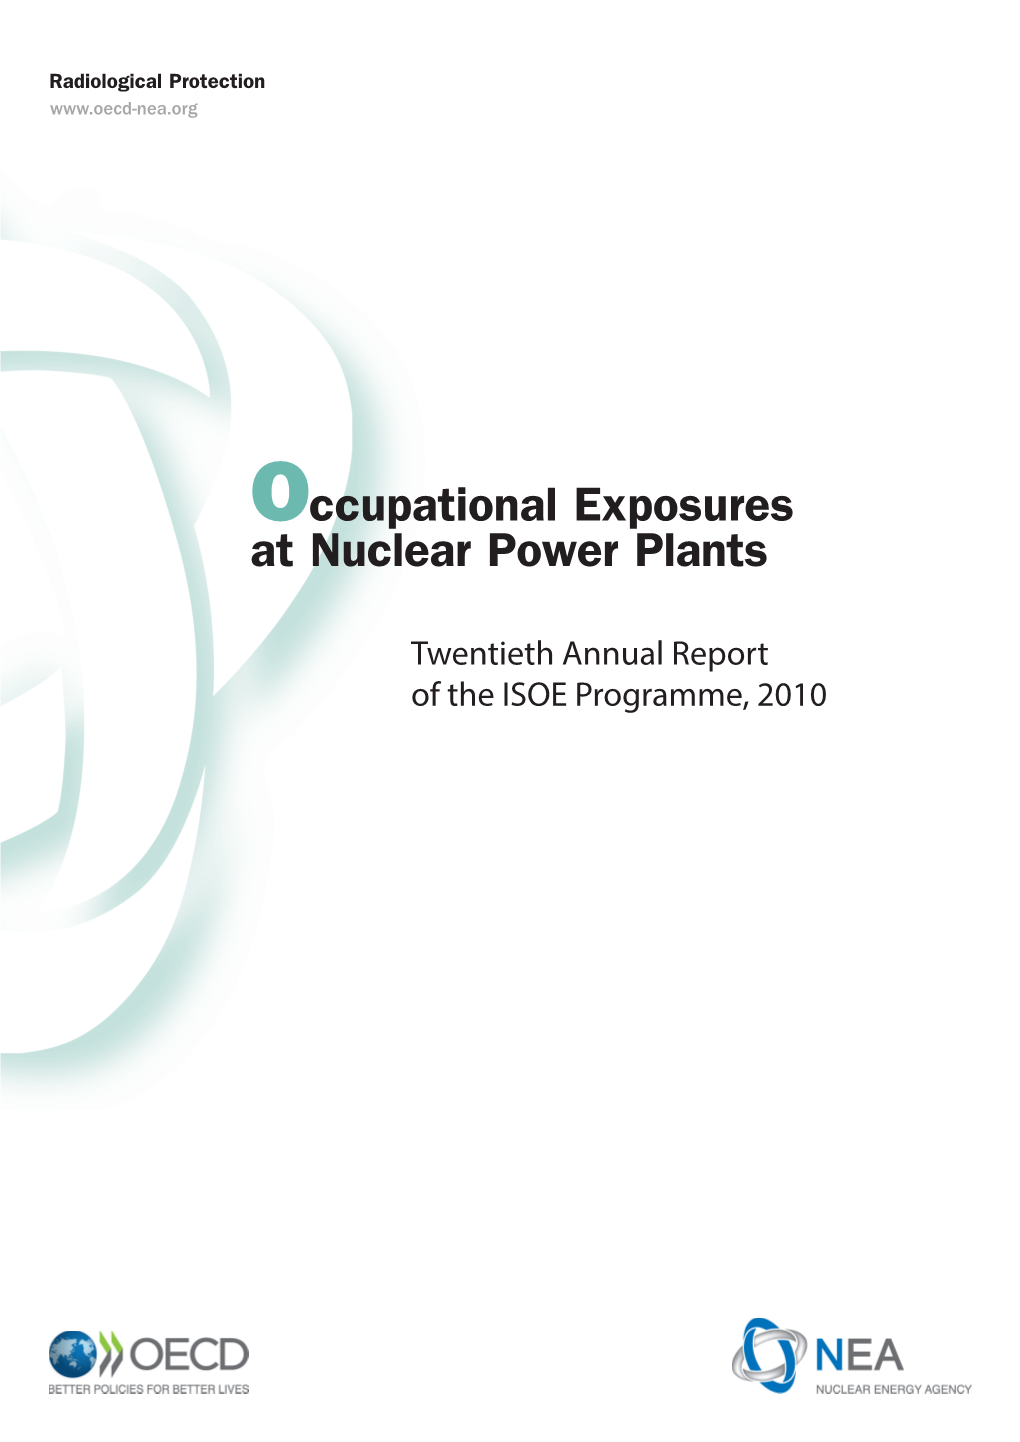 Occupational Exposures at Nuclear Power Plants